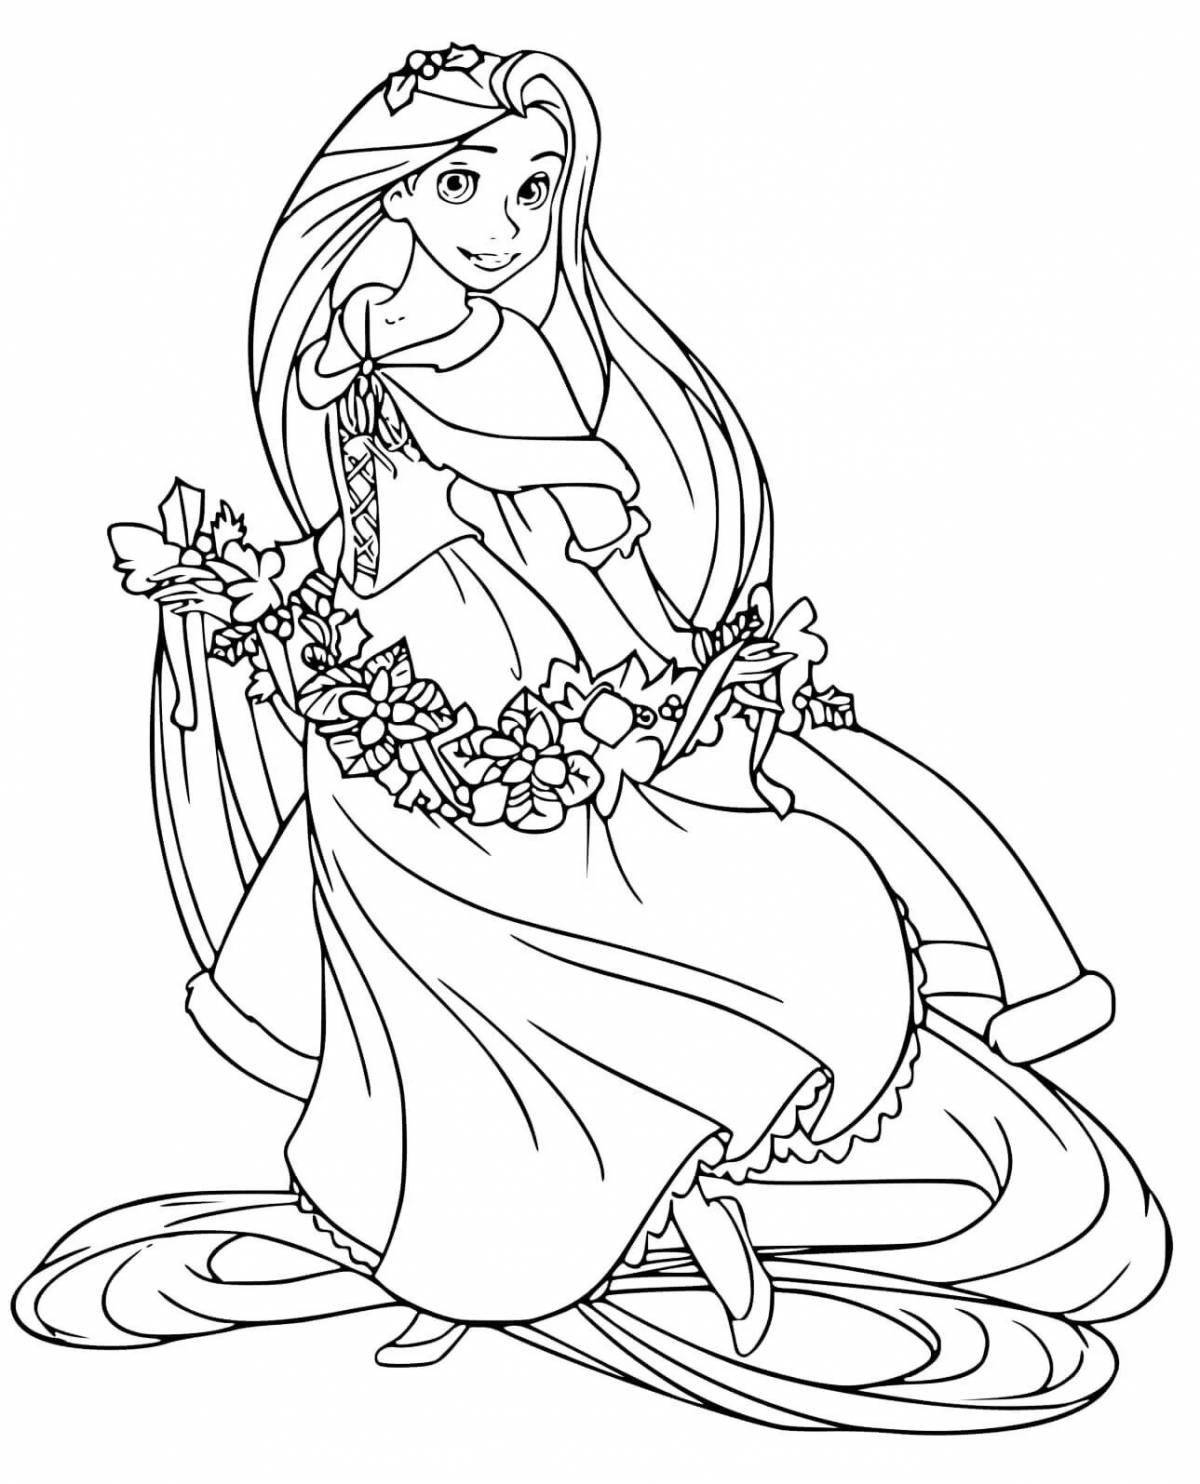 Coloring page graceful princess with long hair